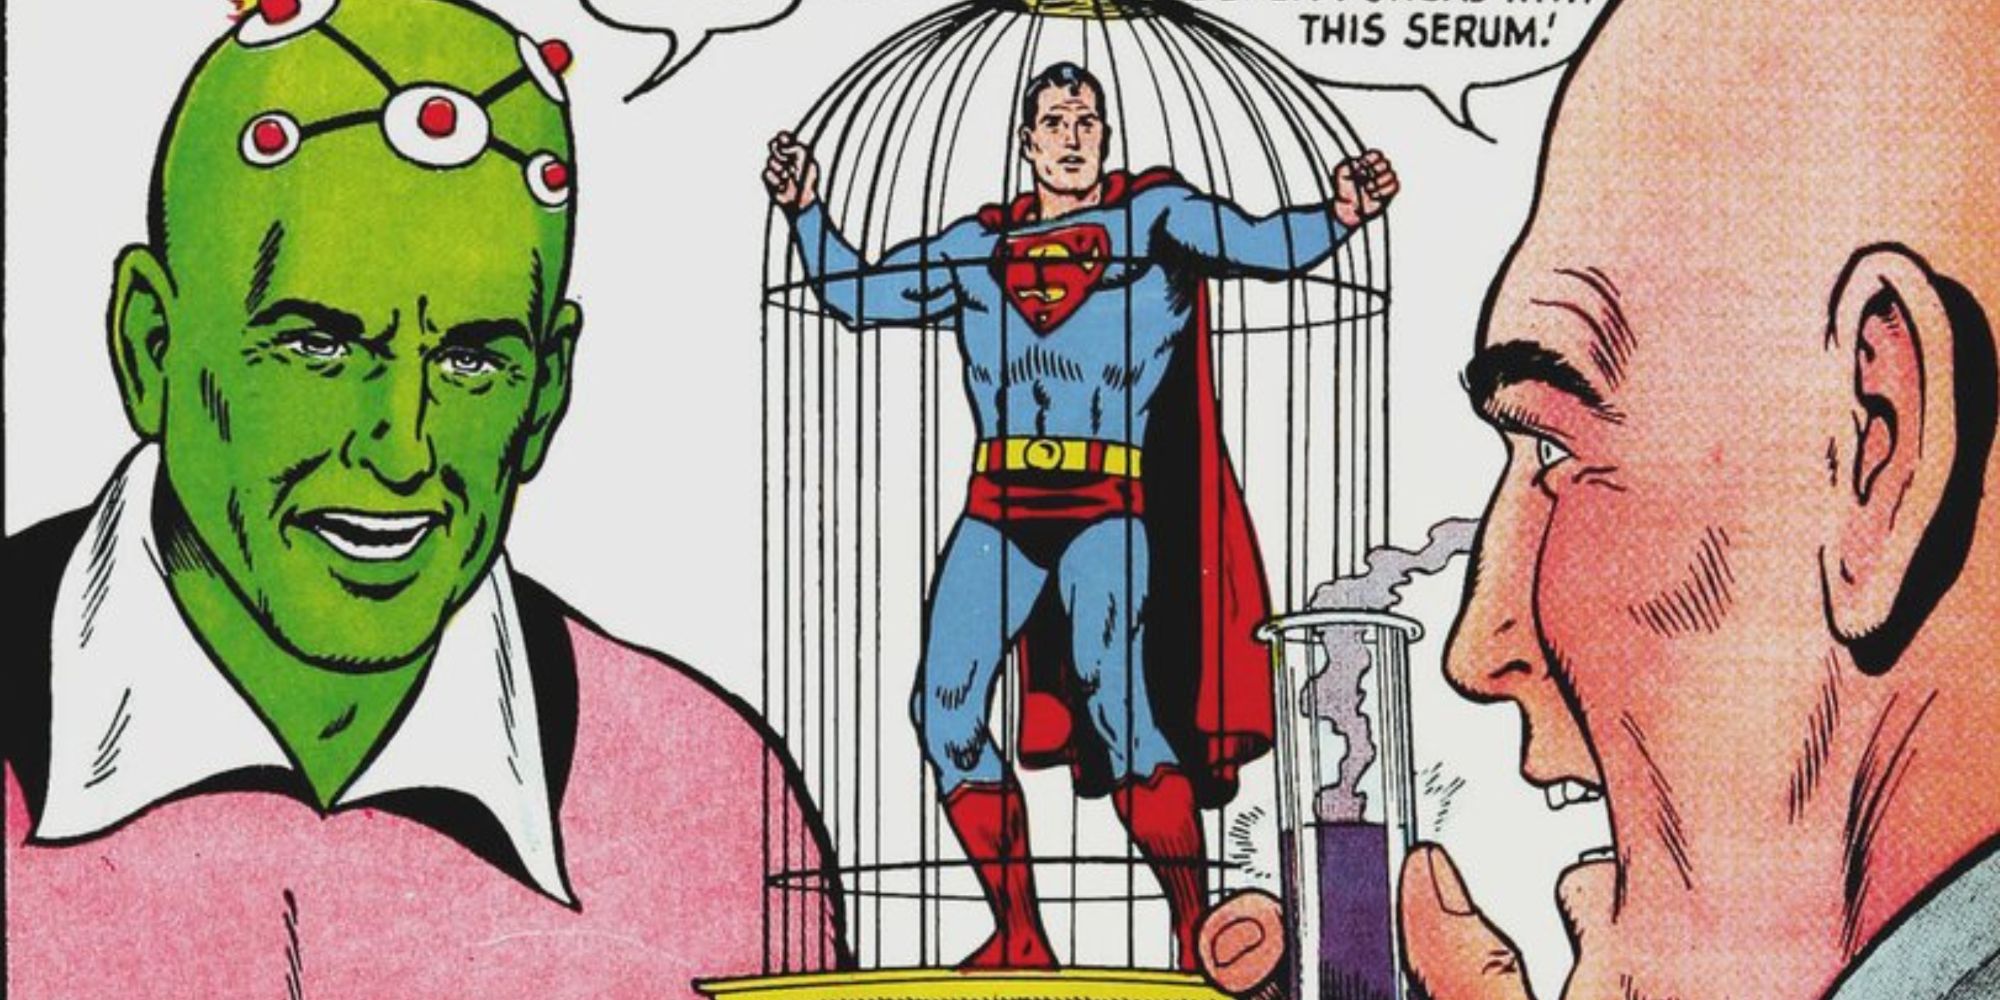 Lex Luthor and Brainiac talking while Superman is in a cage